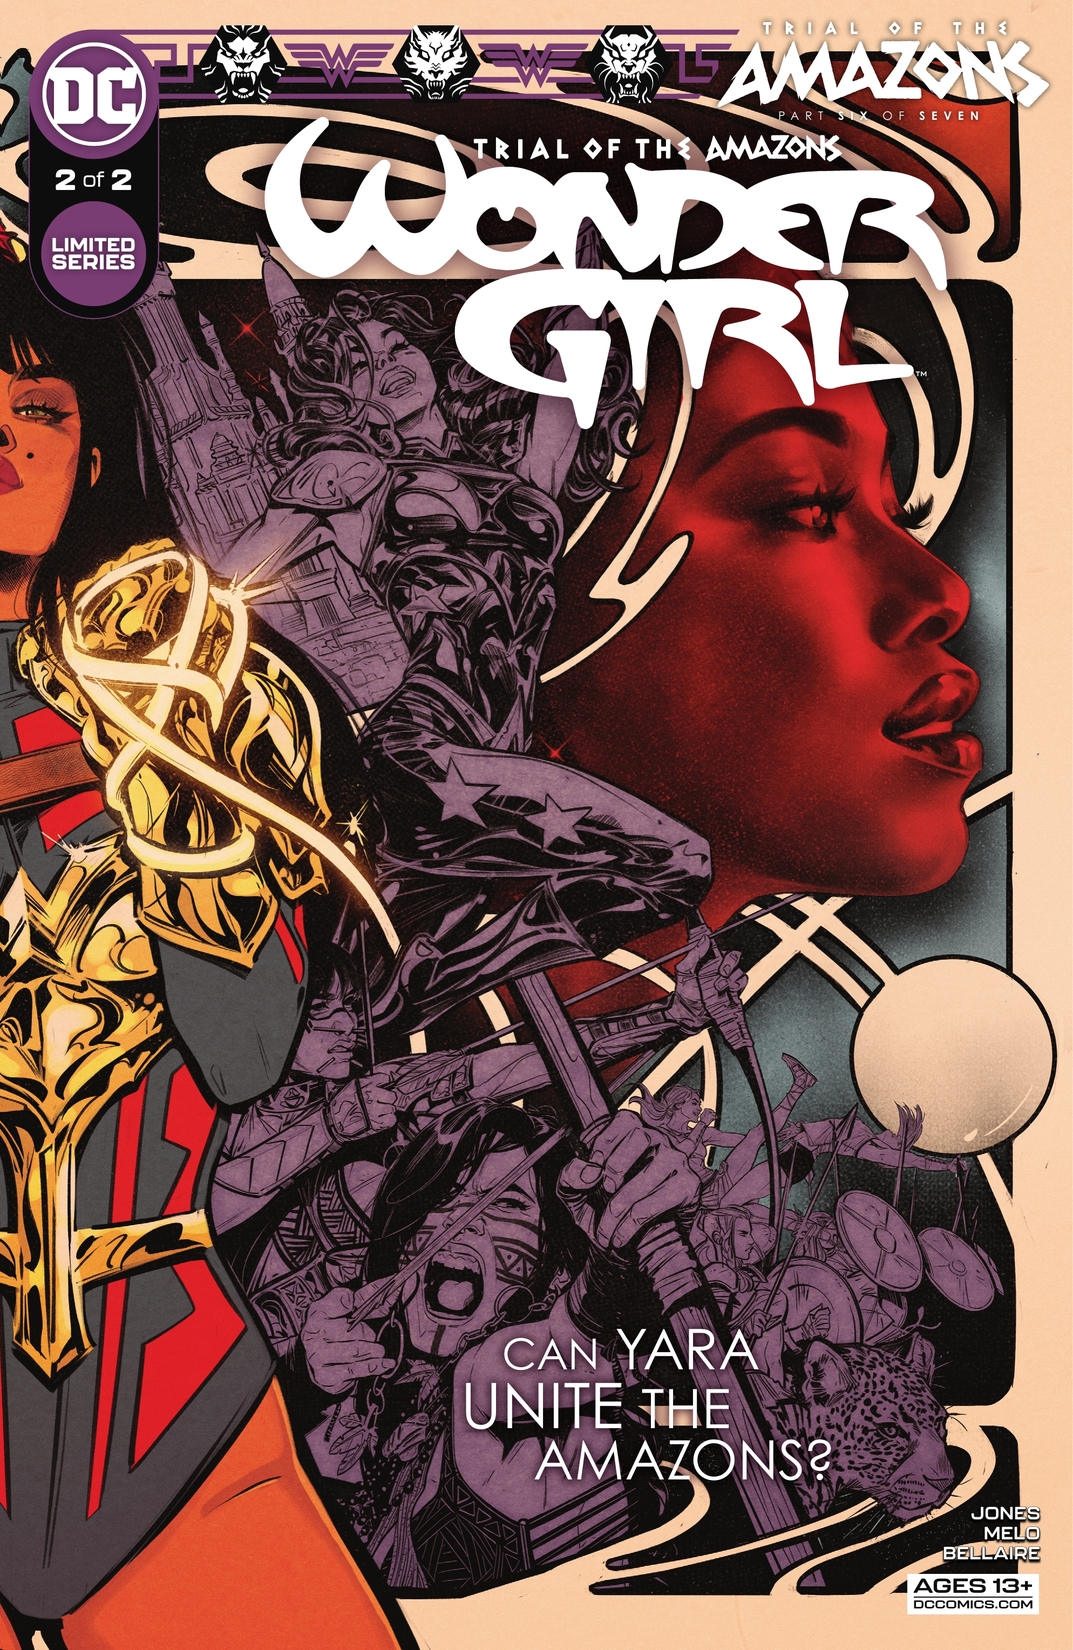 Trial of the Amazons: Wonder Girl #2 preview images